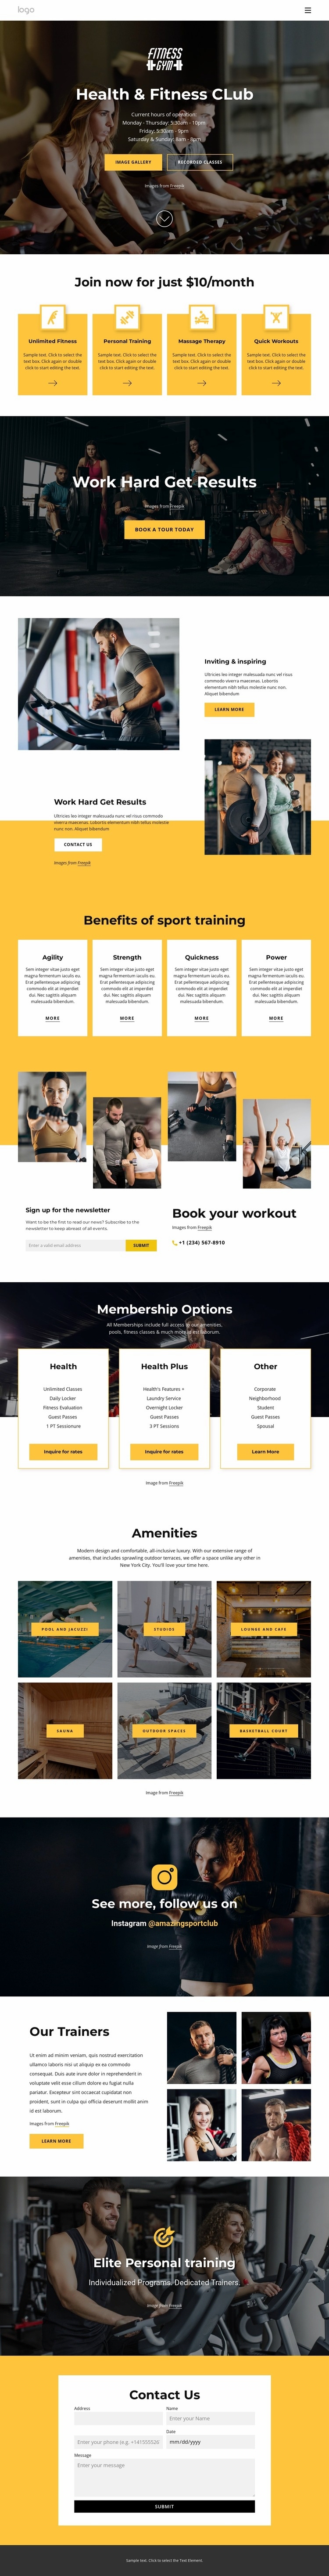 Health and fitness club Homepage Design